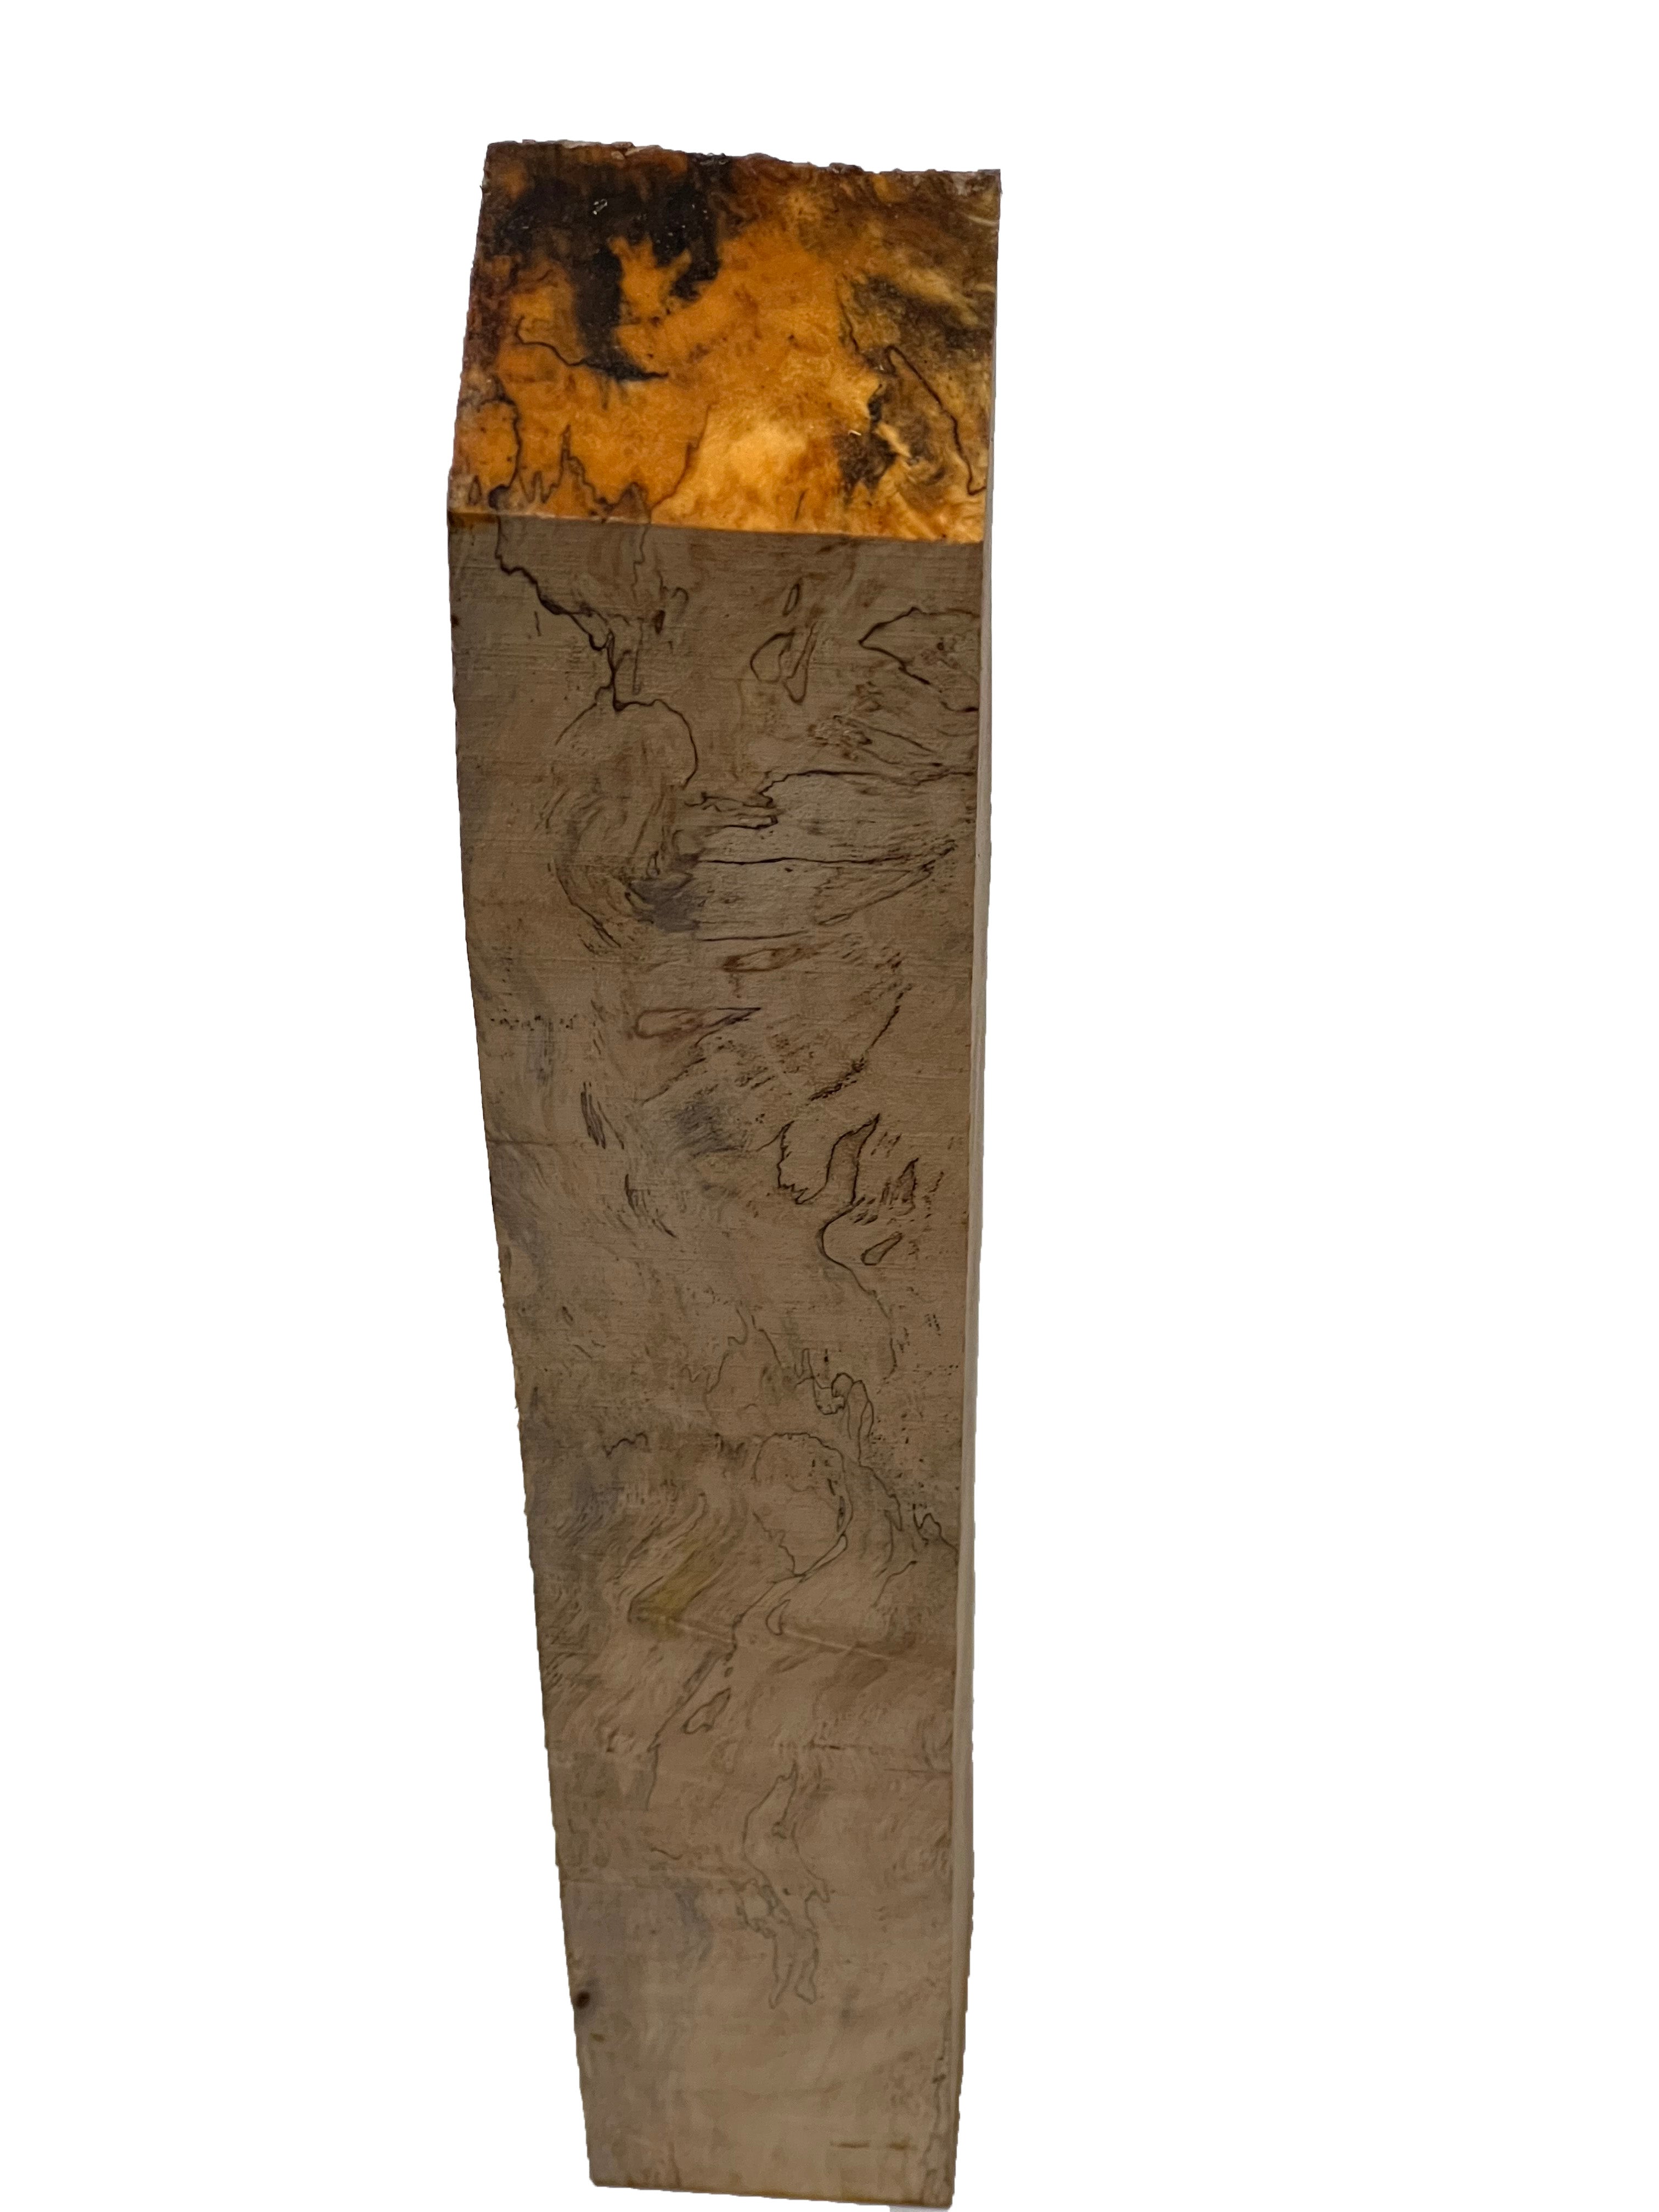 Combo Pack 10, Spalted Tamarind Turning Blanks 18” x 1-1/2” x 1-1/2” - Exotic Wood Zone - Buy online Across USA 